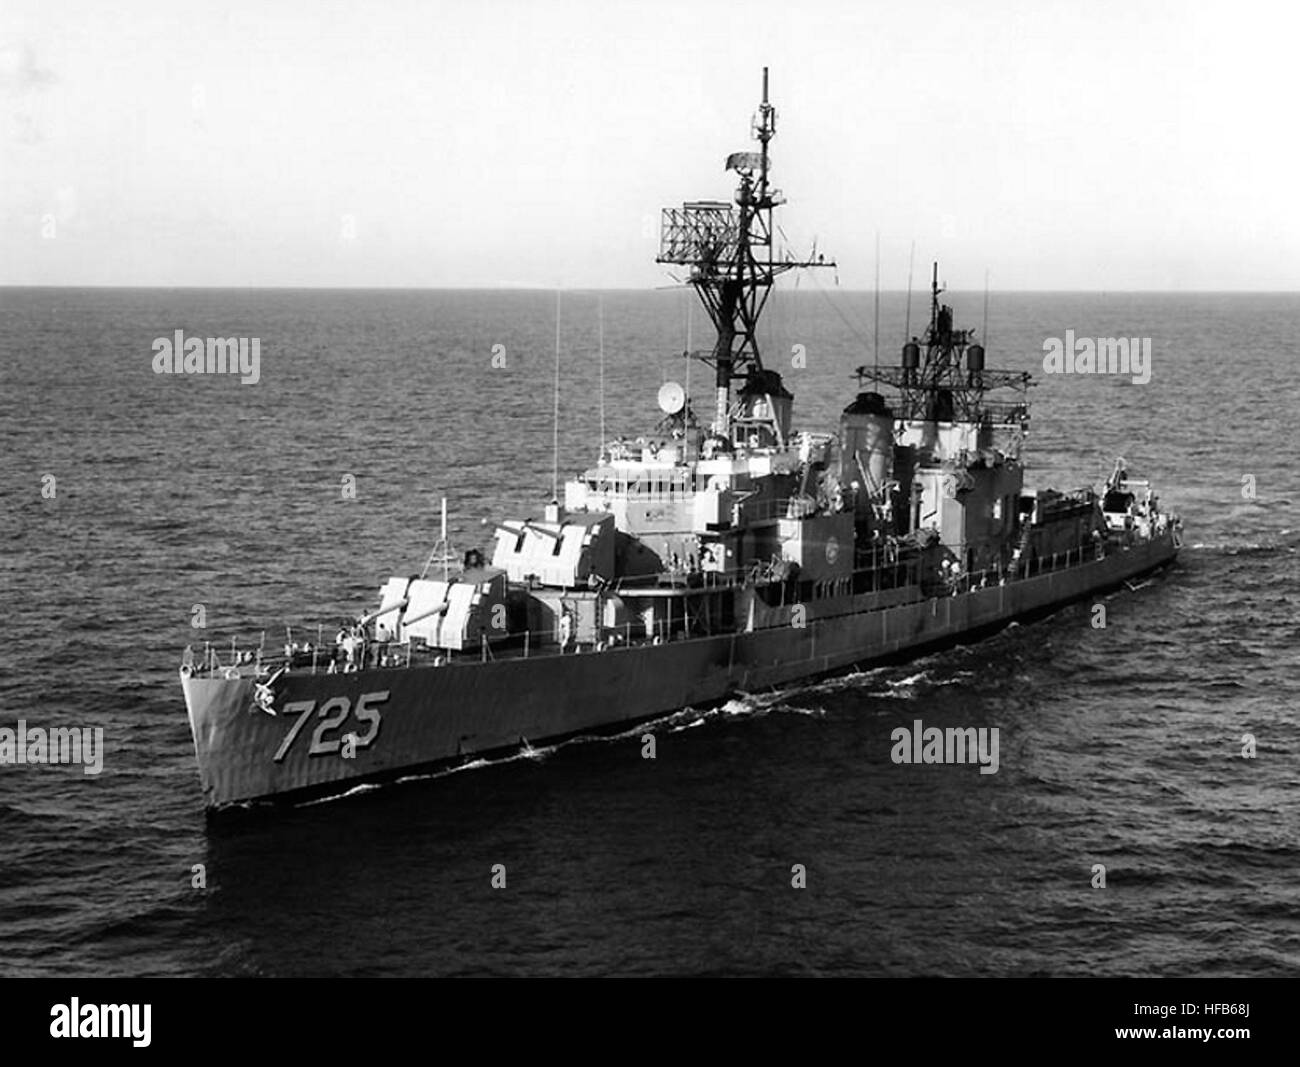 USS O'Brien (DD-725) underway off the coast of Oahu, Hawaii, 15 May 1968. Taken by Photographer's Mate 2nd Class T.F. O'Sullivan.  Official U.S. Navy Photograph, from the collections of the Naval Historical Center. Dd725-obrien Stock Photo